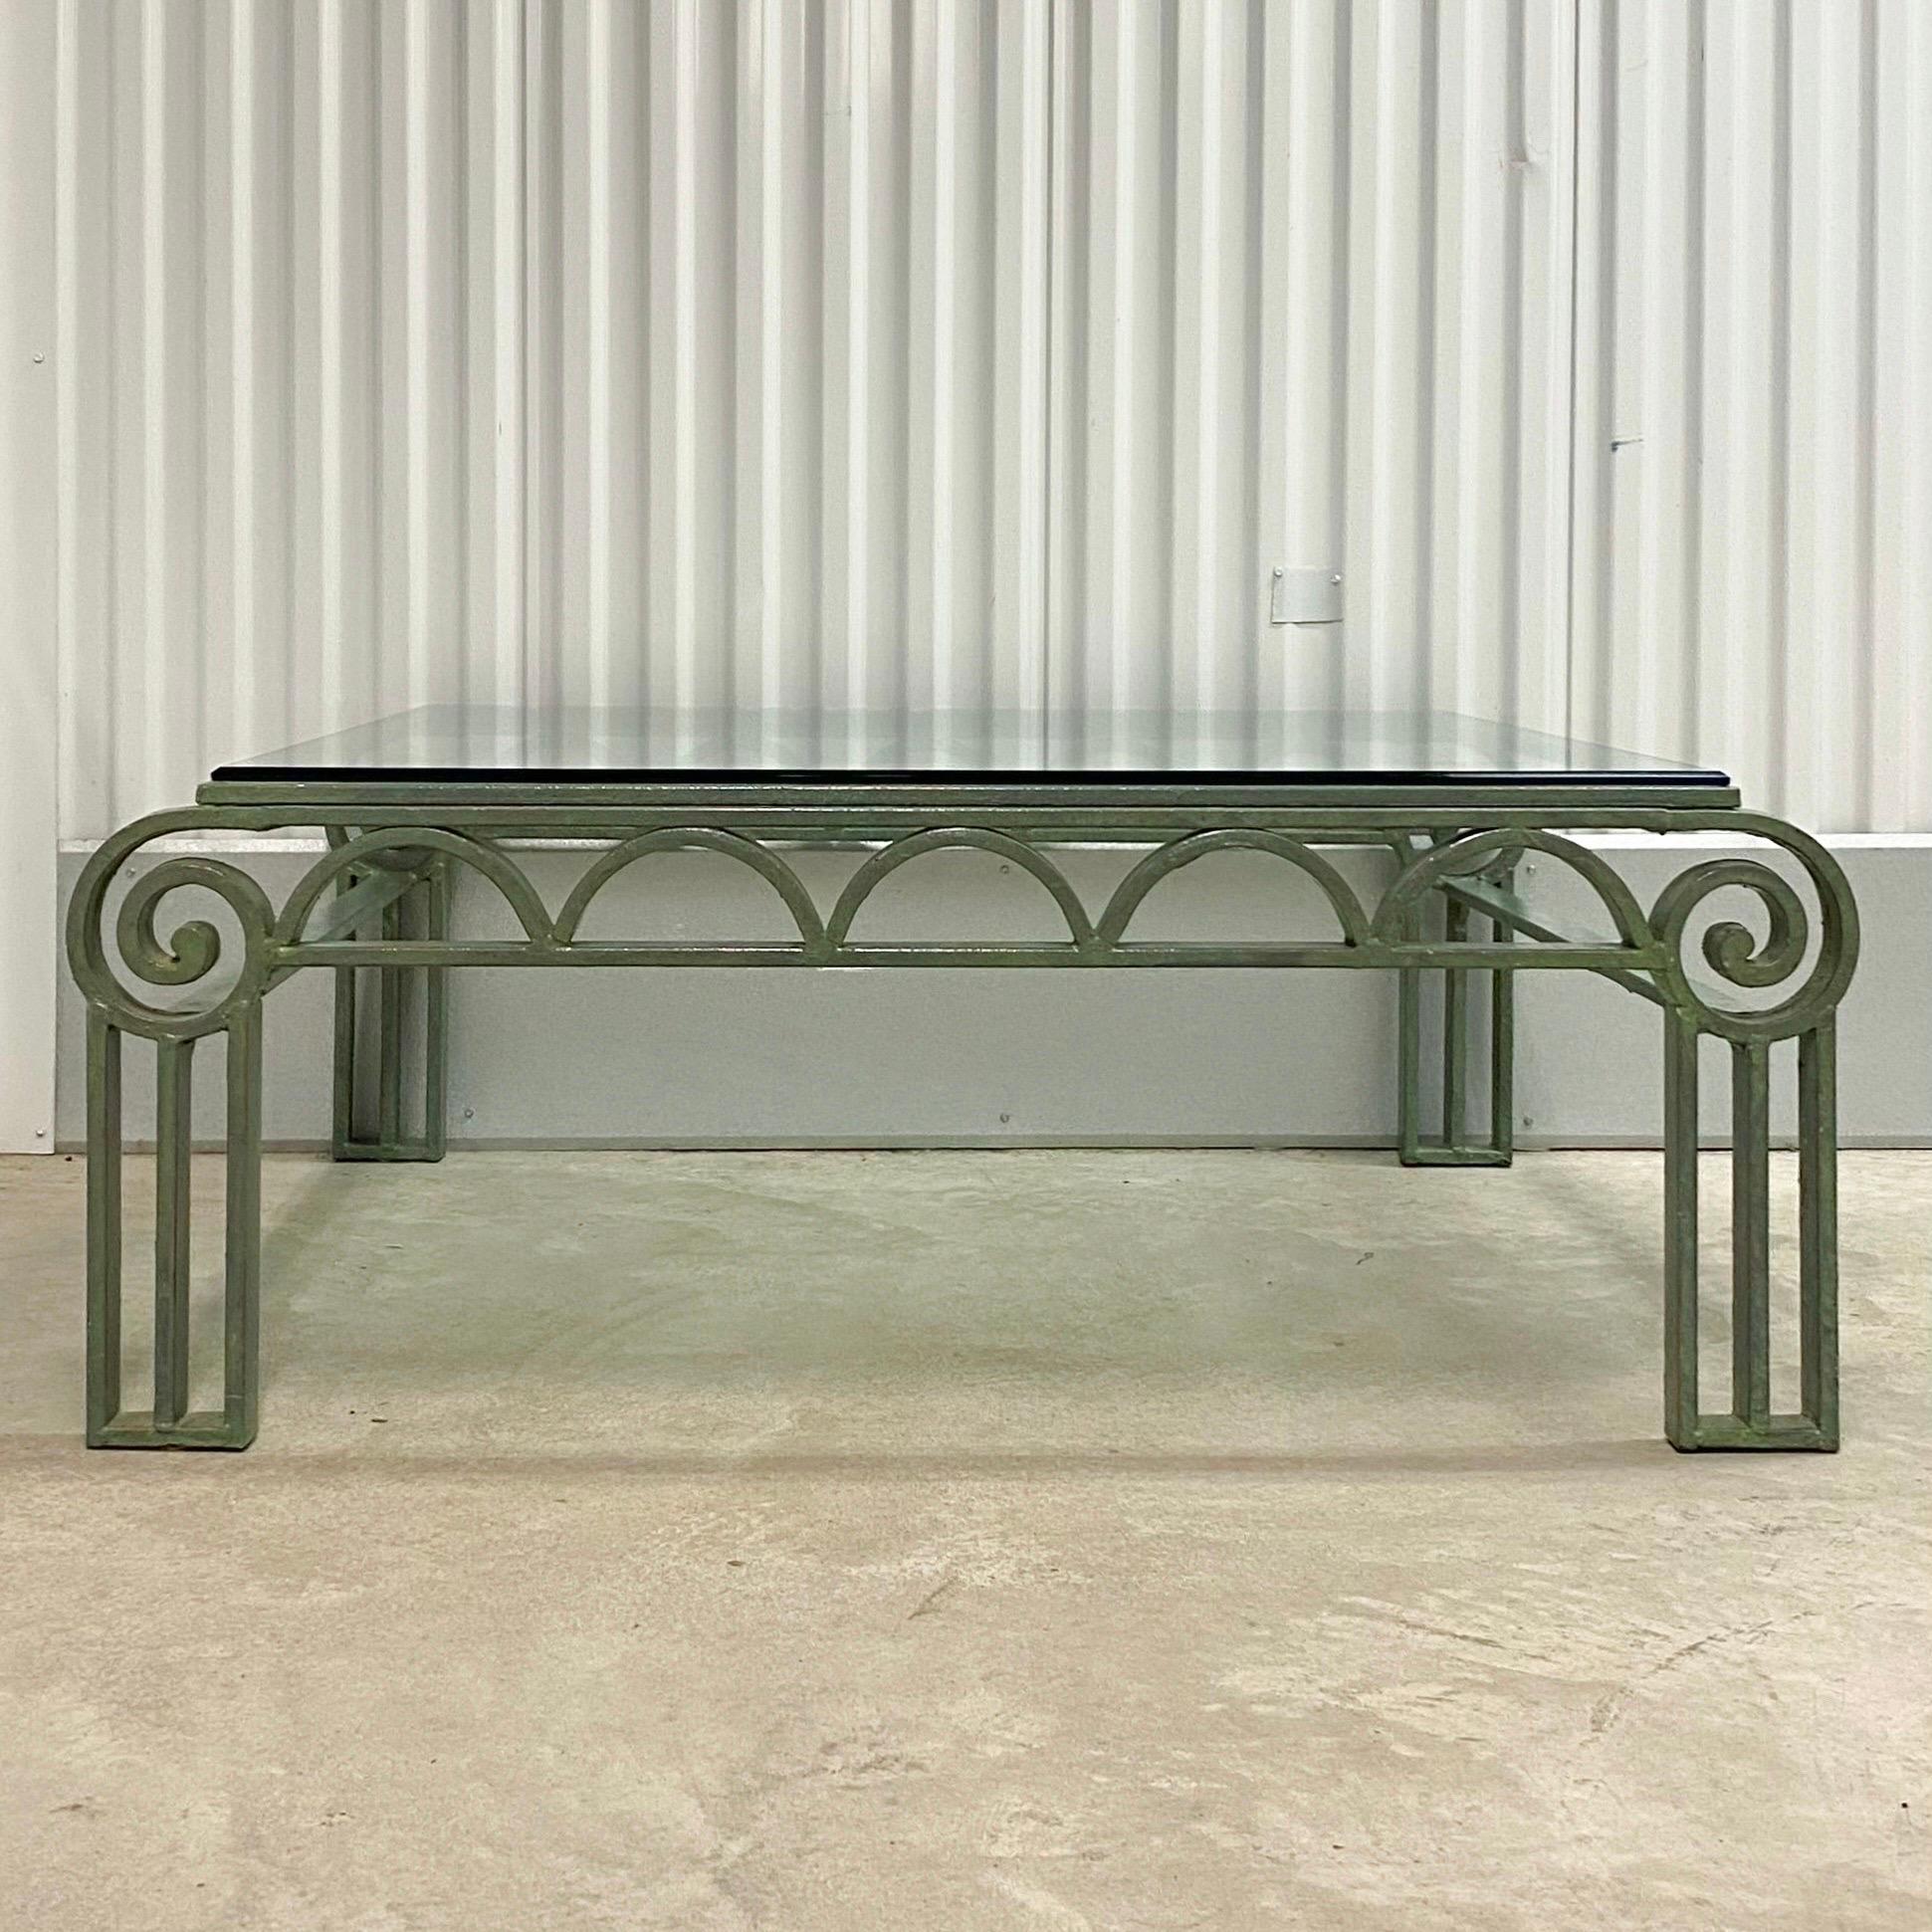 Vintage circa 1990s iron table with verdigris finish. Green painted iron with column legs meeting scrolled corners and half moon apron. Glass top. Available matching side table available separately as seen in last image.